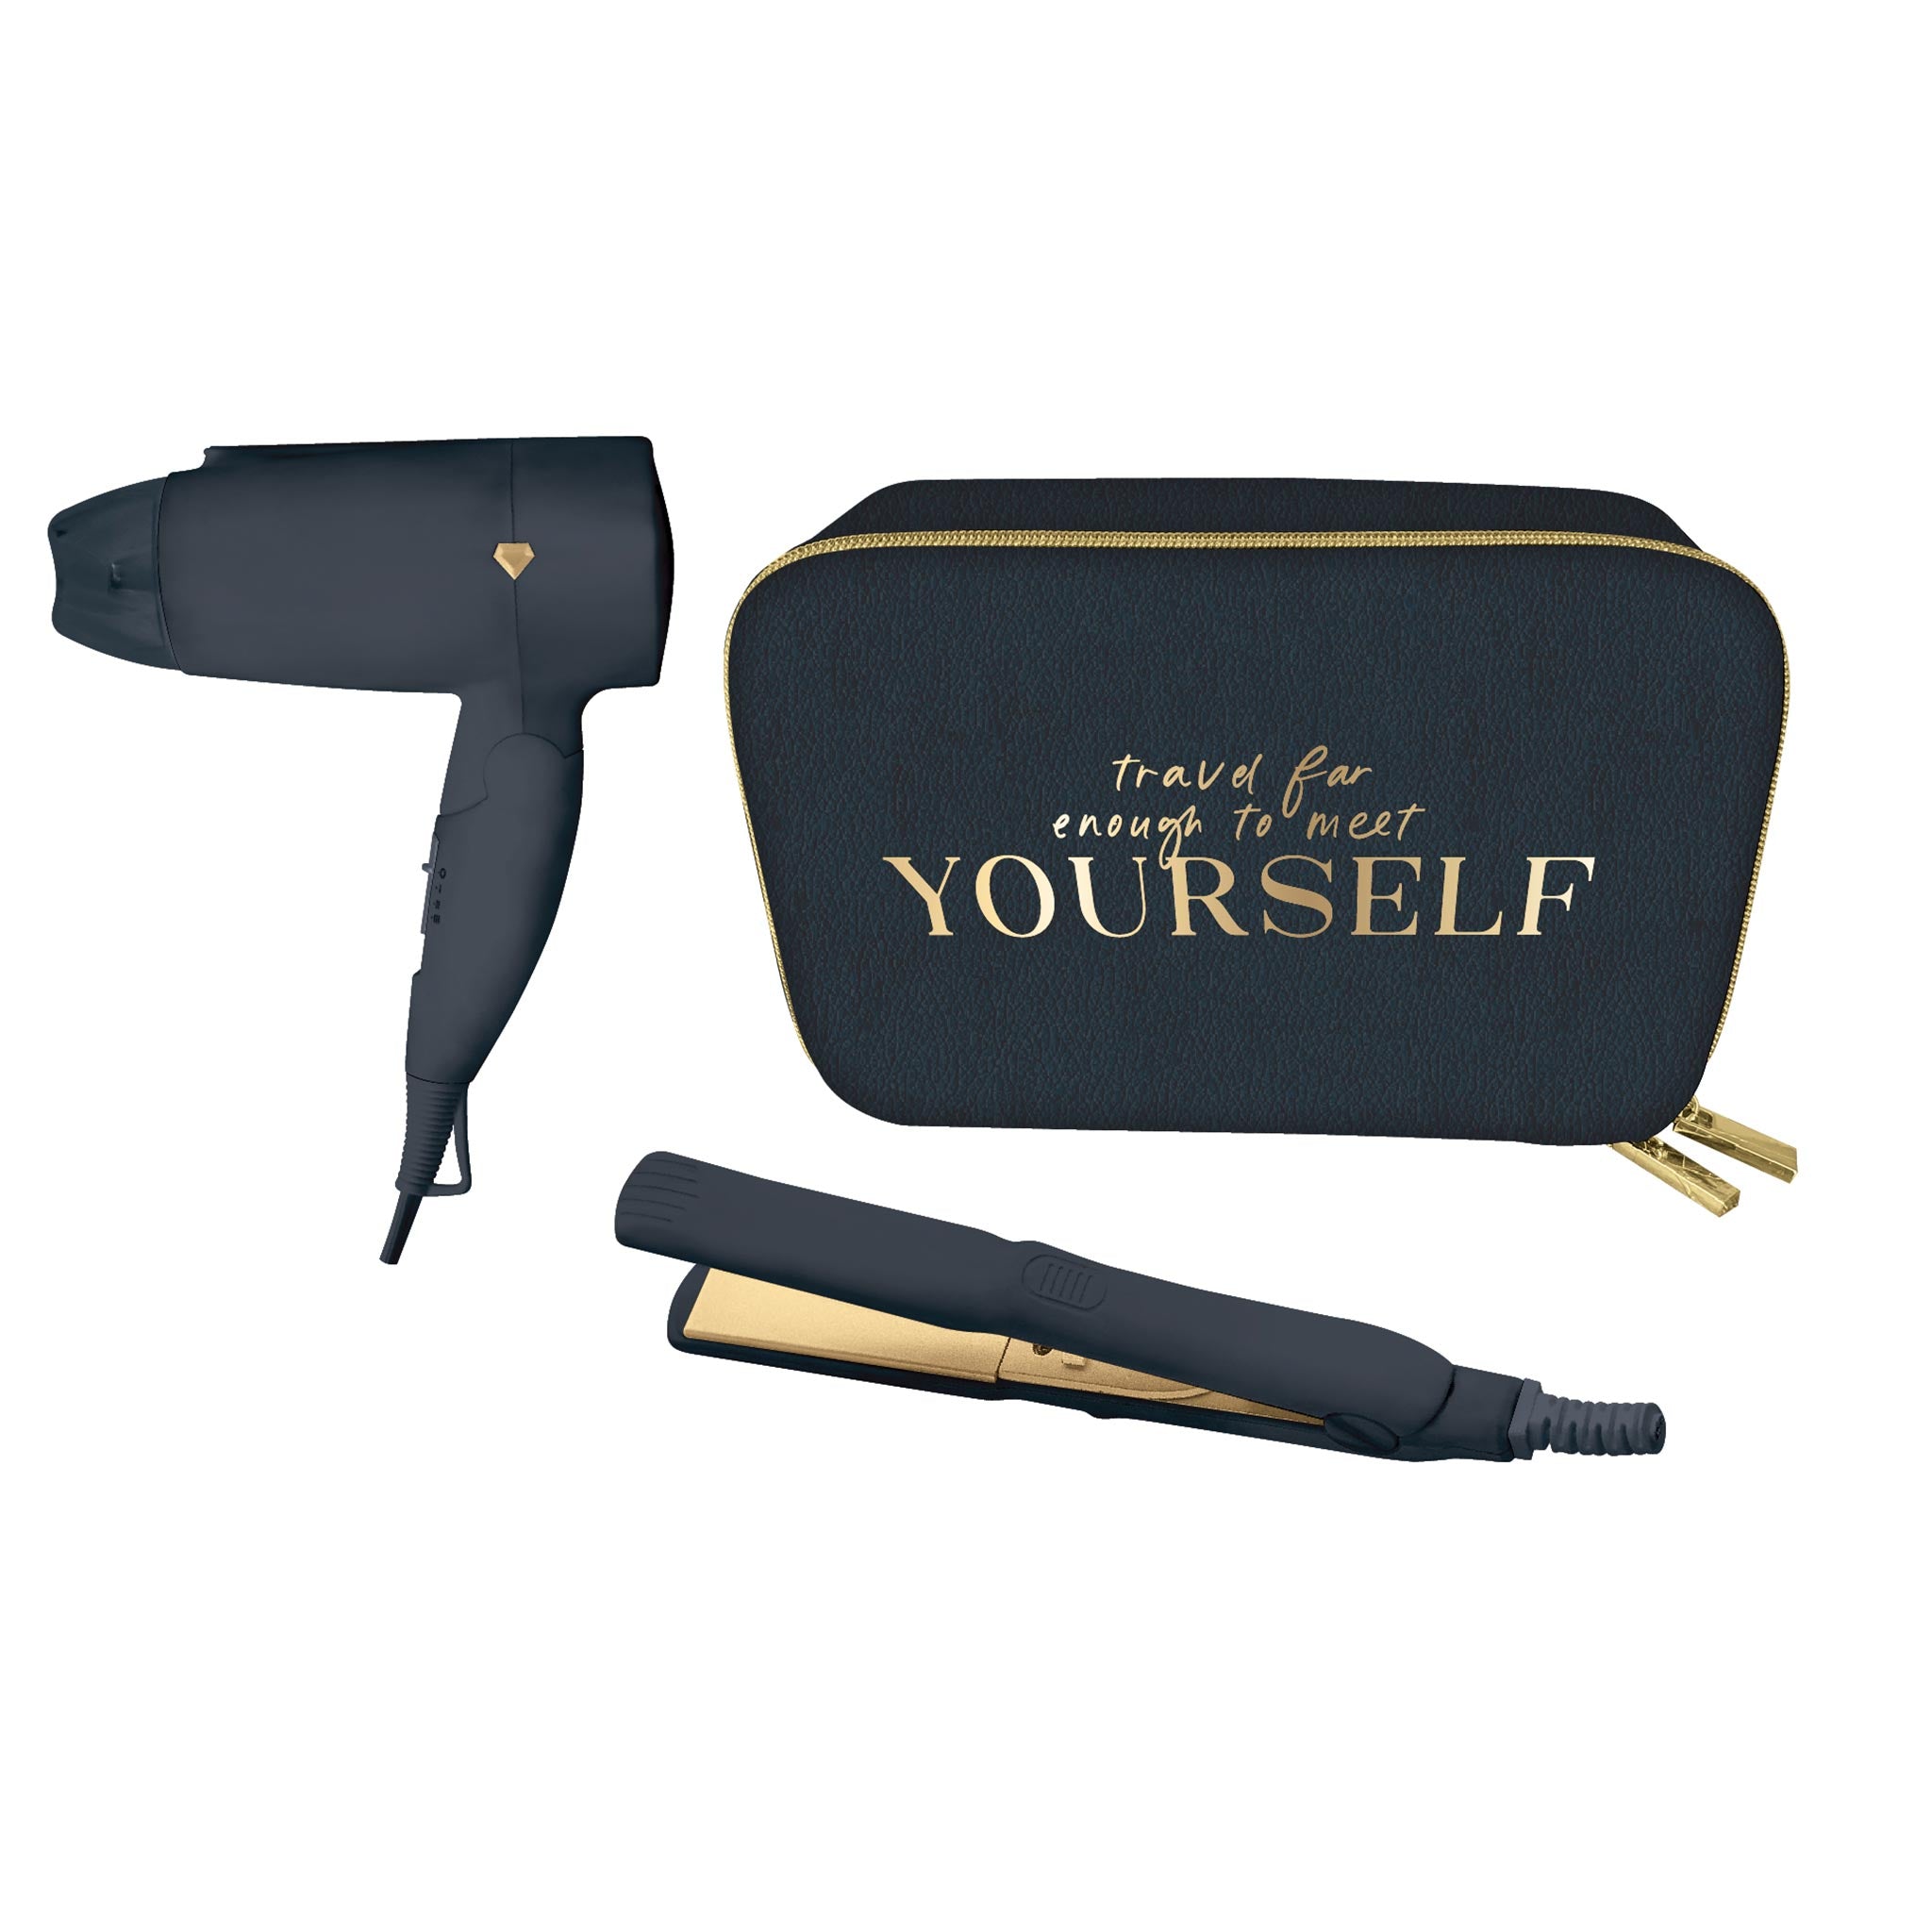 Luxe & Willow Carry Me There Hair Tool Travel Kit. Black. NWT